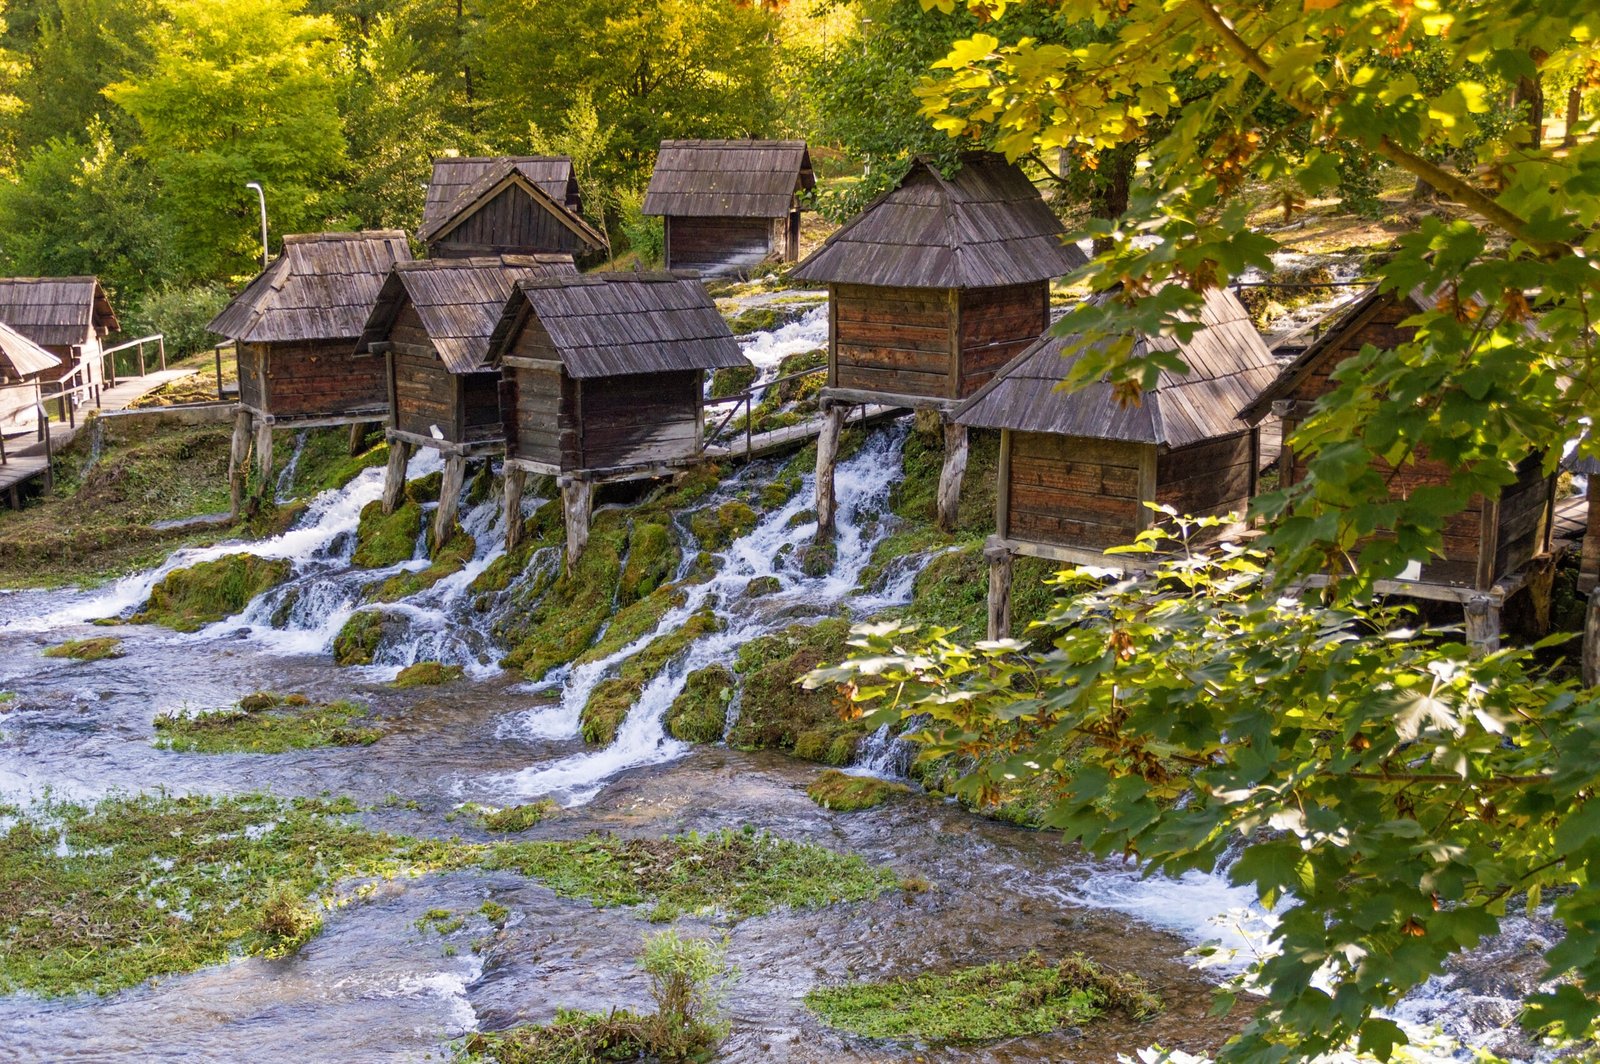 What to see in Jajce | Pliva watermills